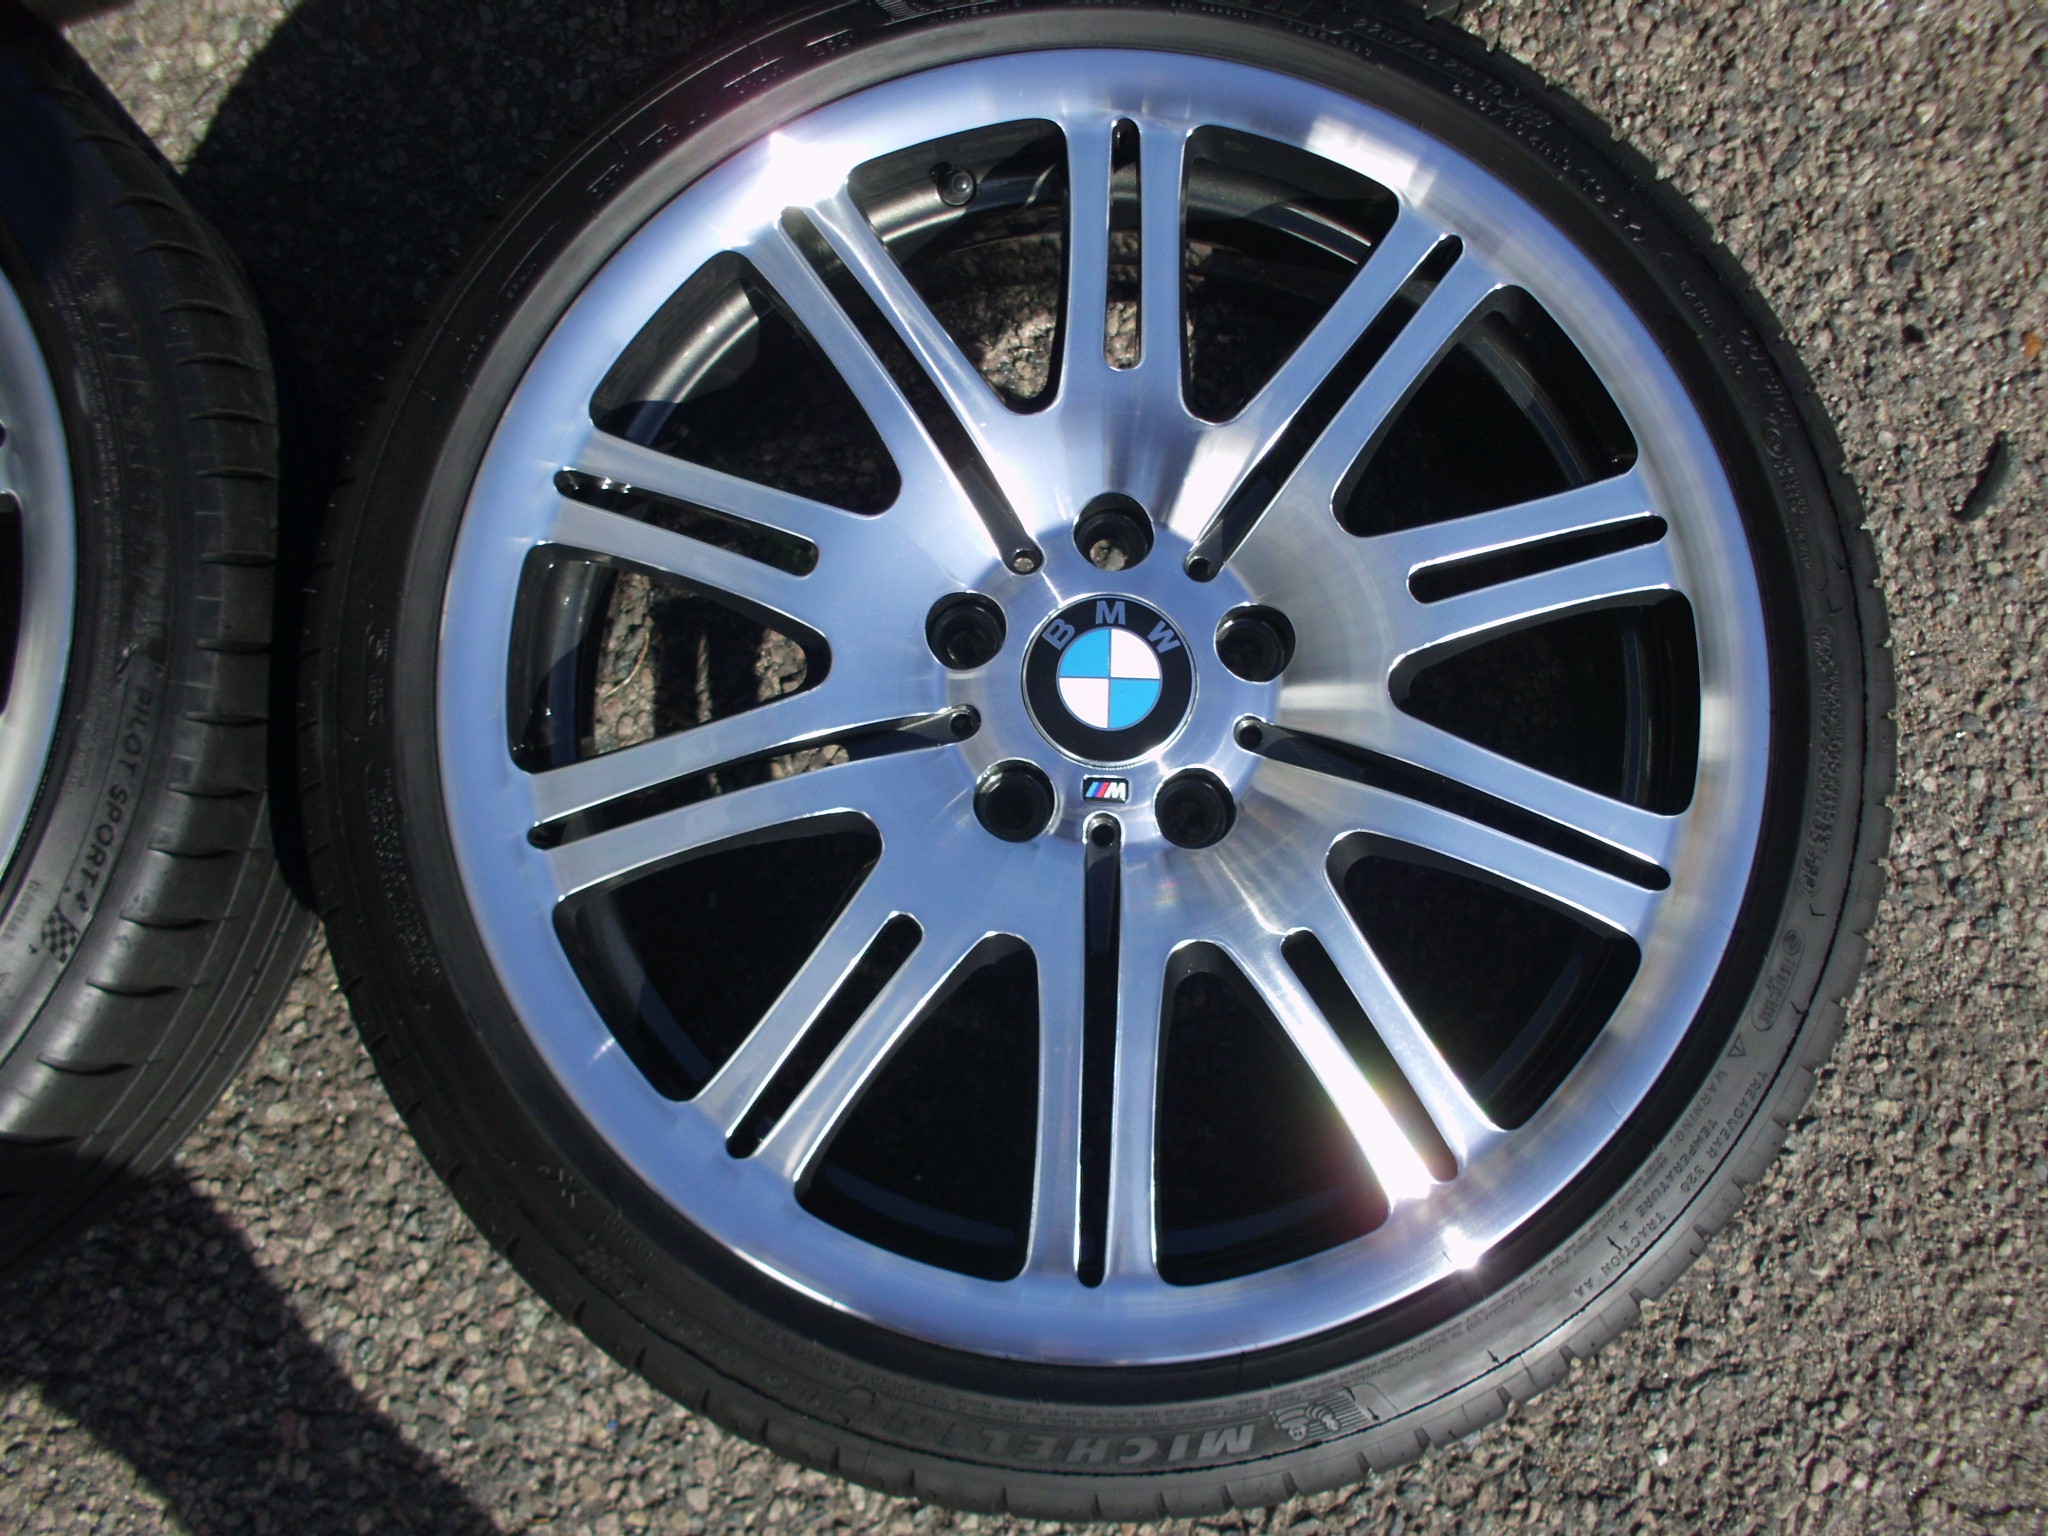 USED 19" GENUINE BMW FORGED STYLE 67M E46 M3 POLISHED ALLOY WHEELS,WIDE REAR,FULLY REFURBED INC EXCELLENT TYRES